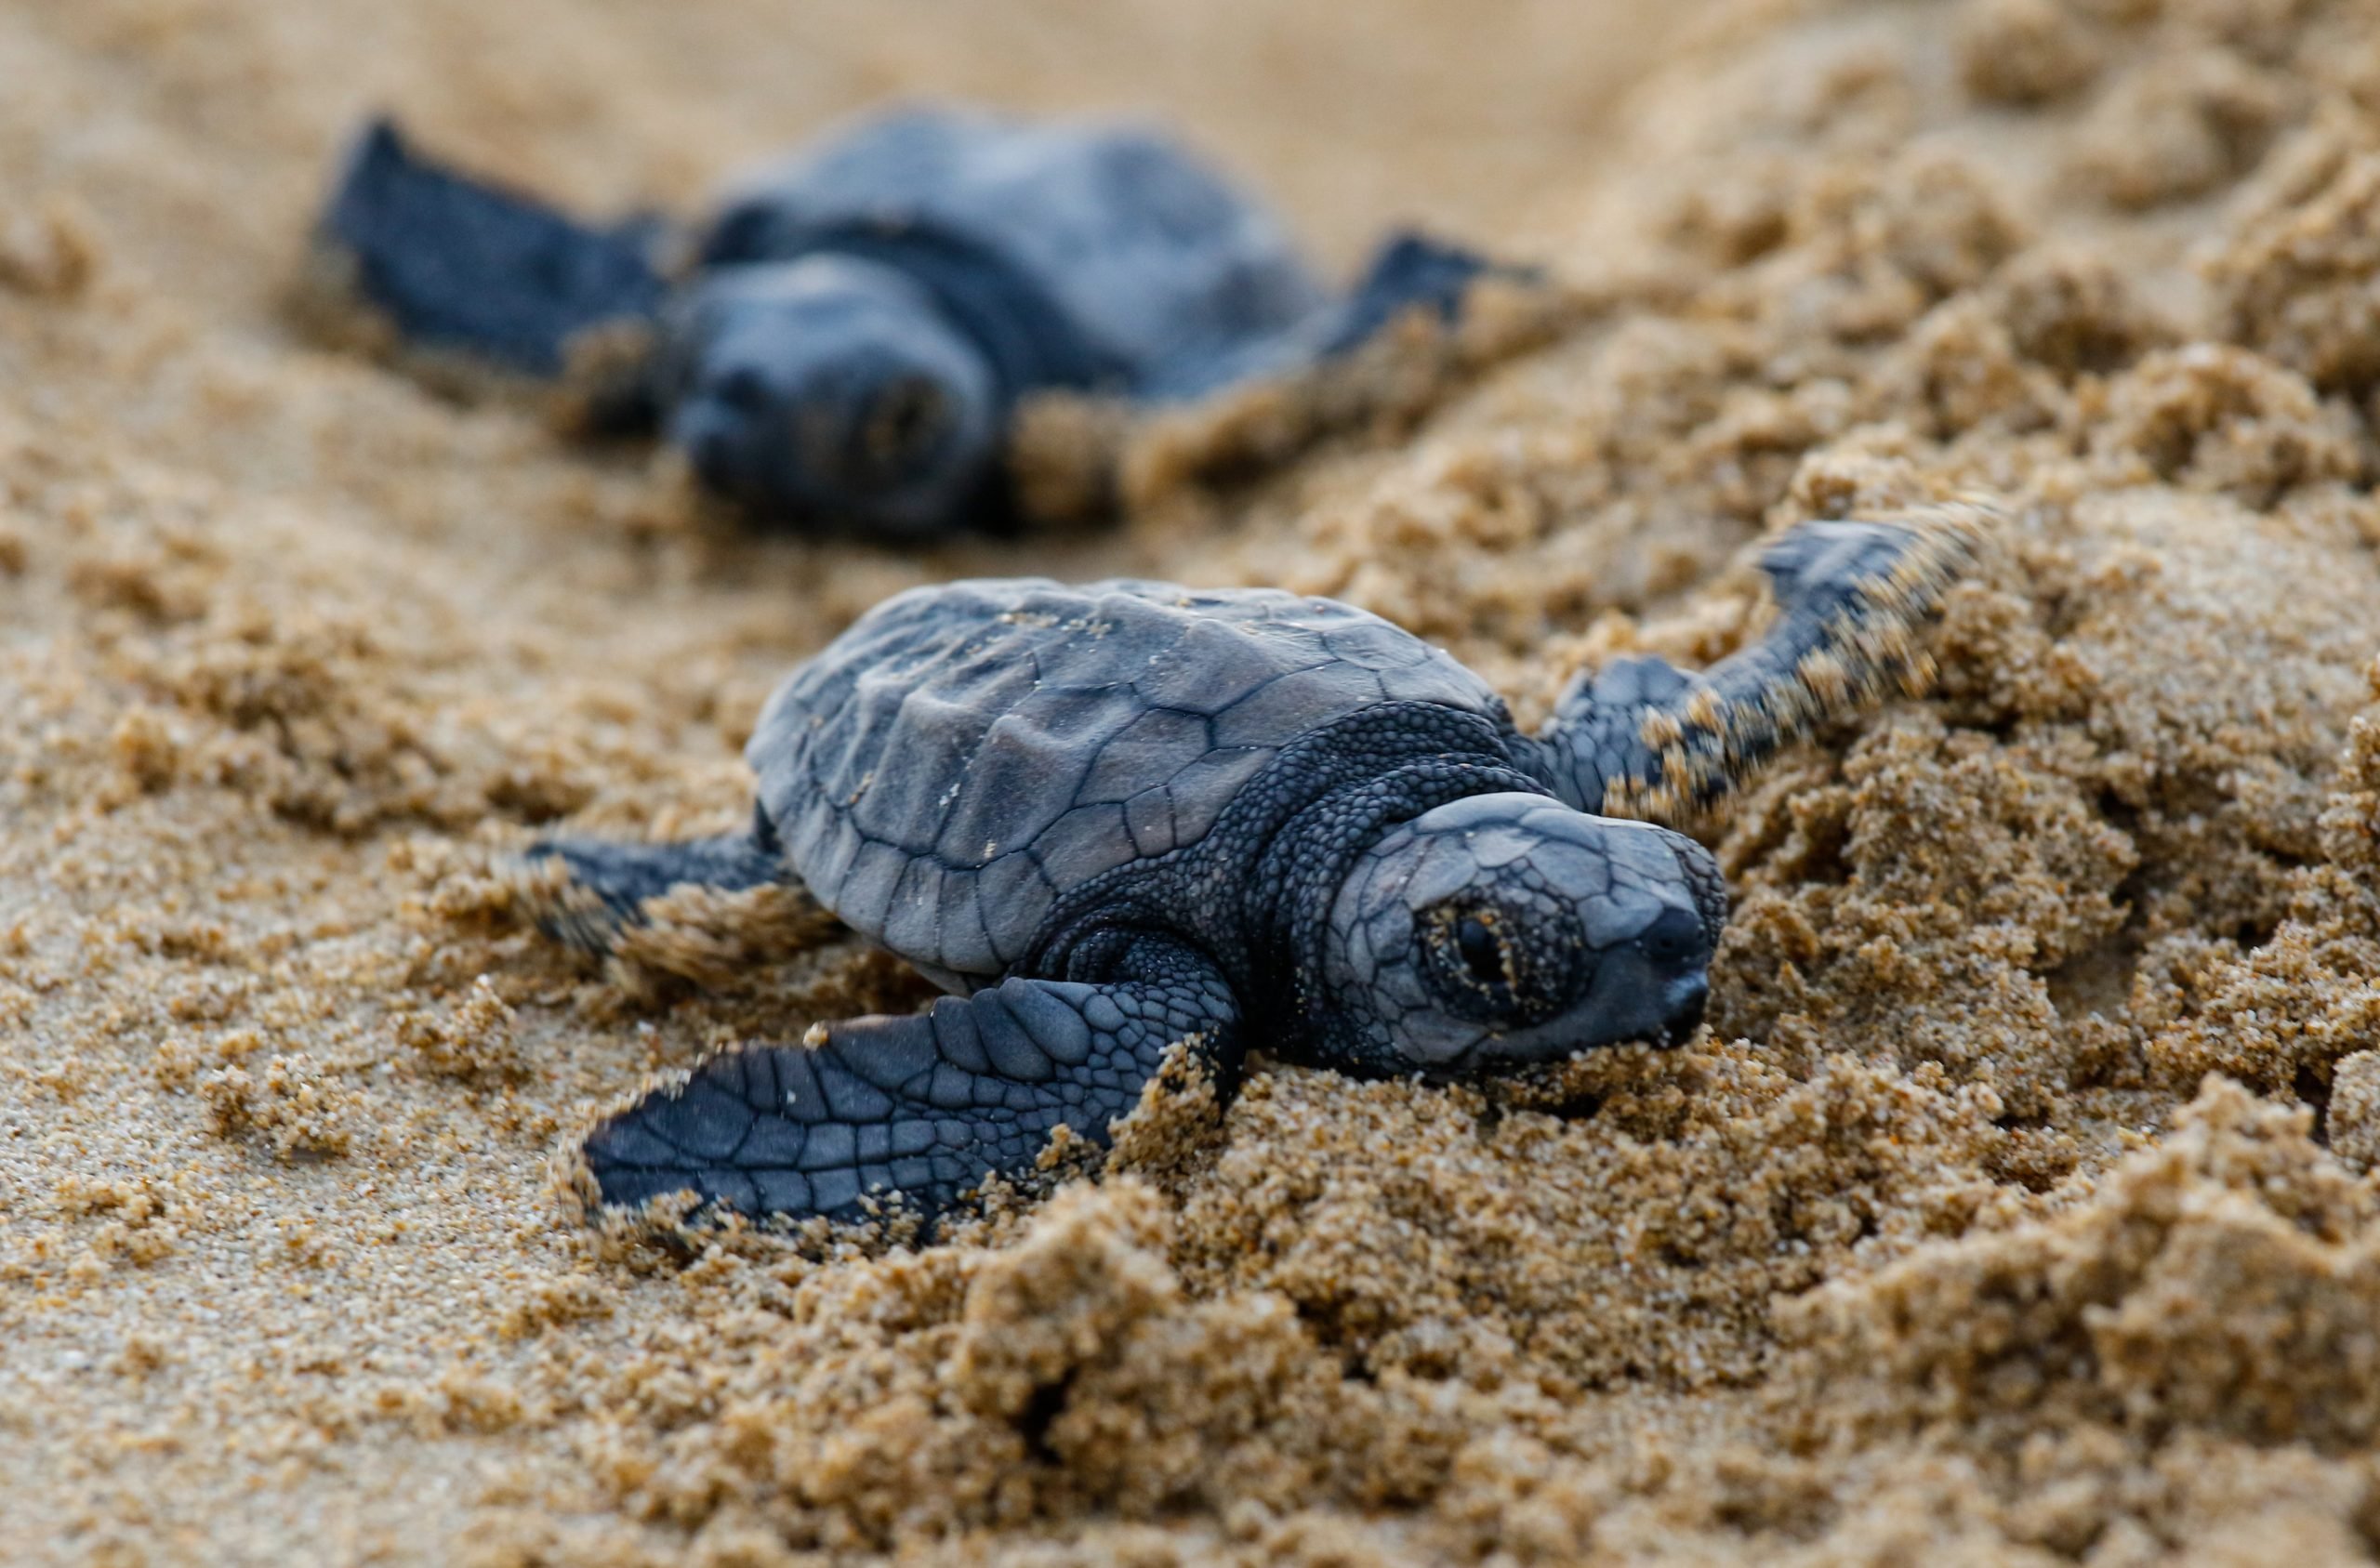 40 Adorable Pictures of Baby Turtles | Reader's Digest